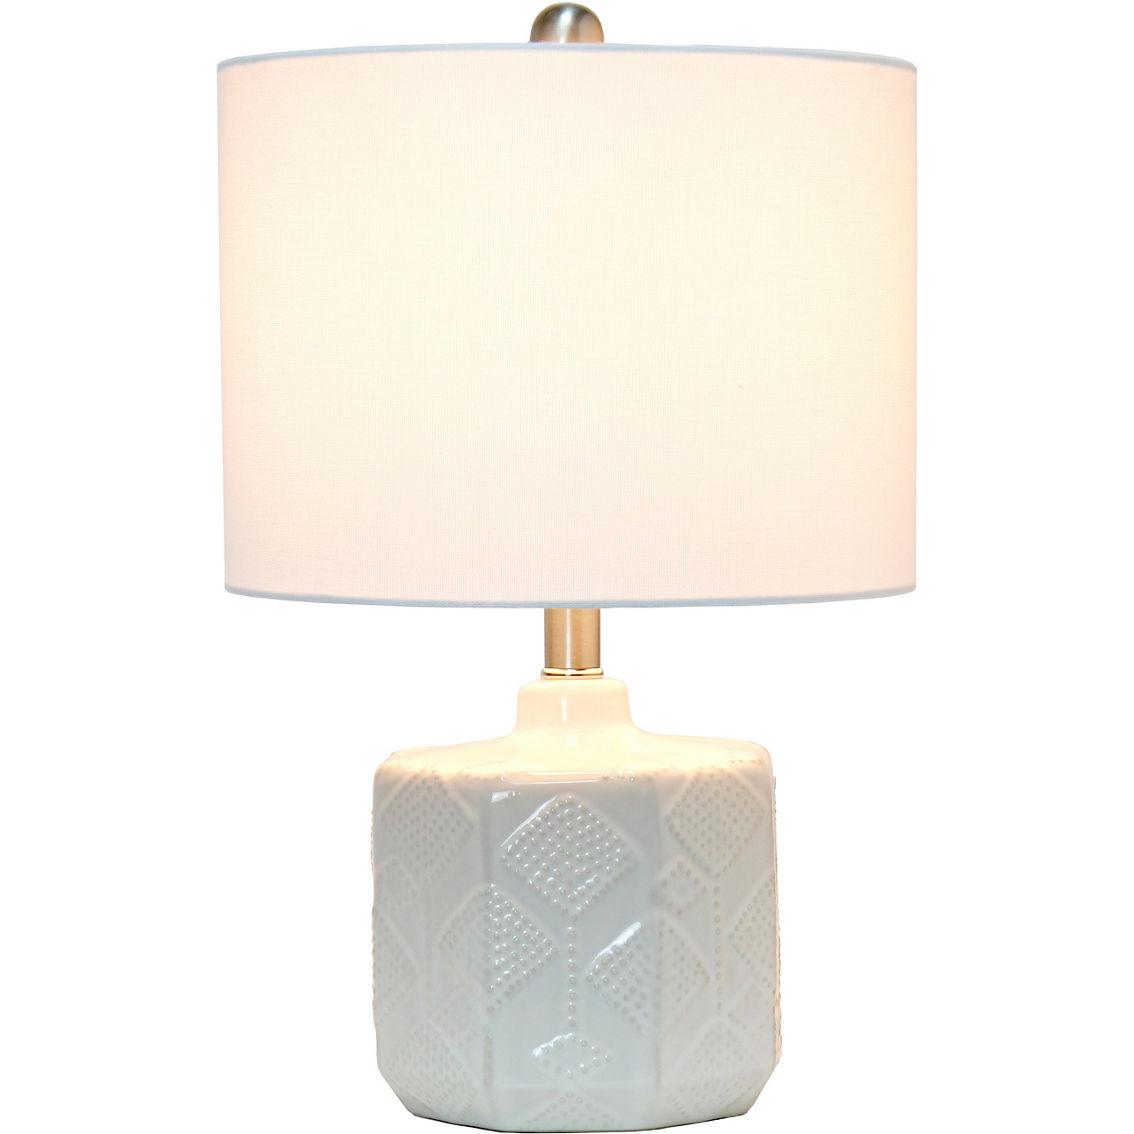 Lalia Home 19 in. Floral Textured Bedside Table Lamp with White Fabric Shade - Image 2 of 8